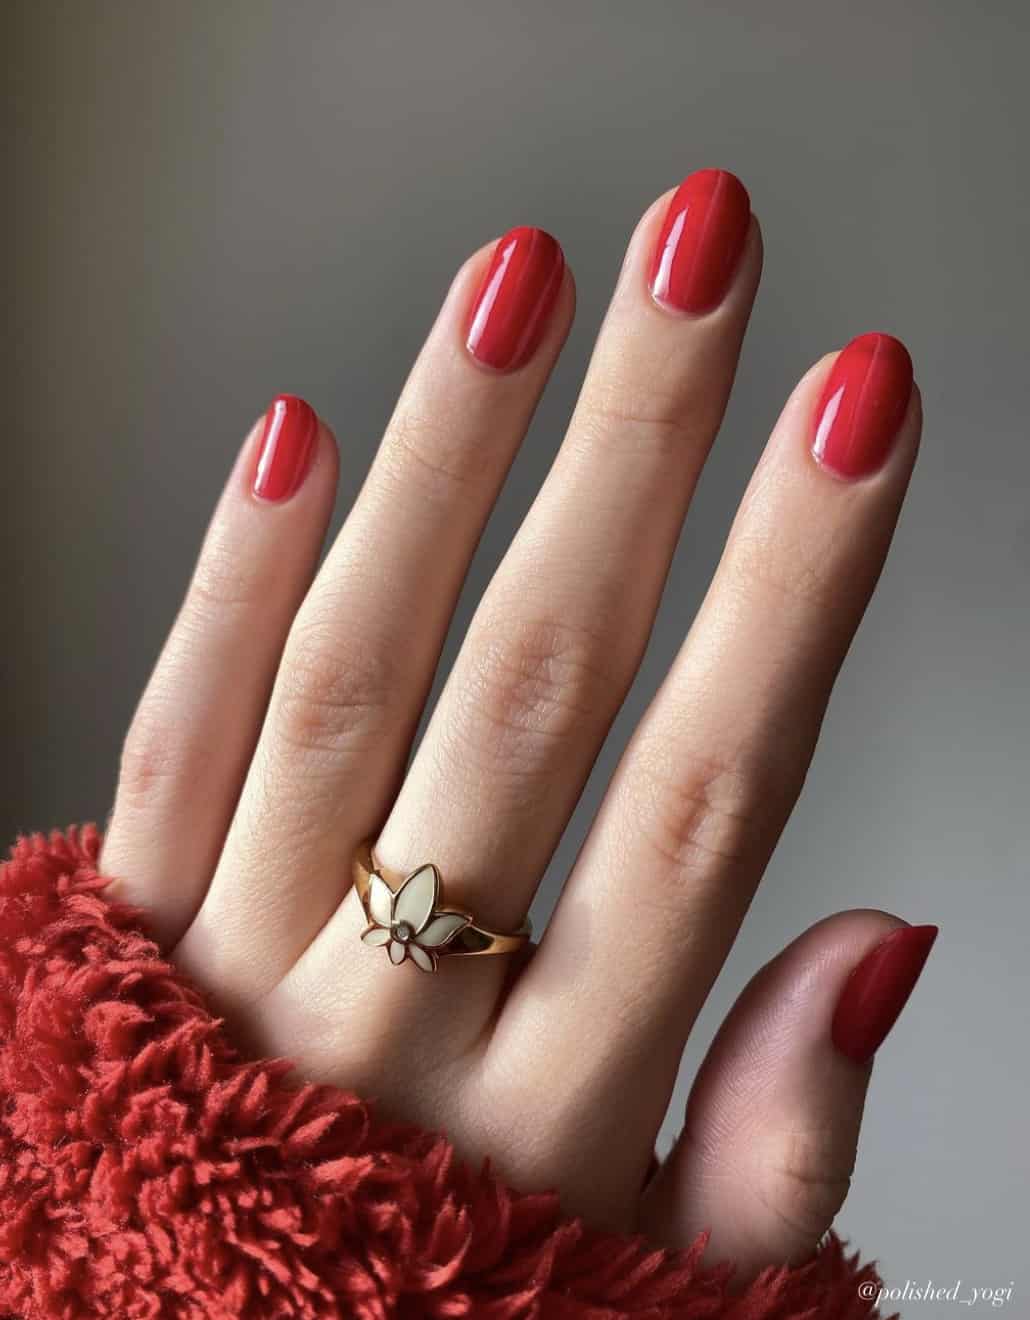 A hand with short round nails painted in a solid bright red polish